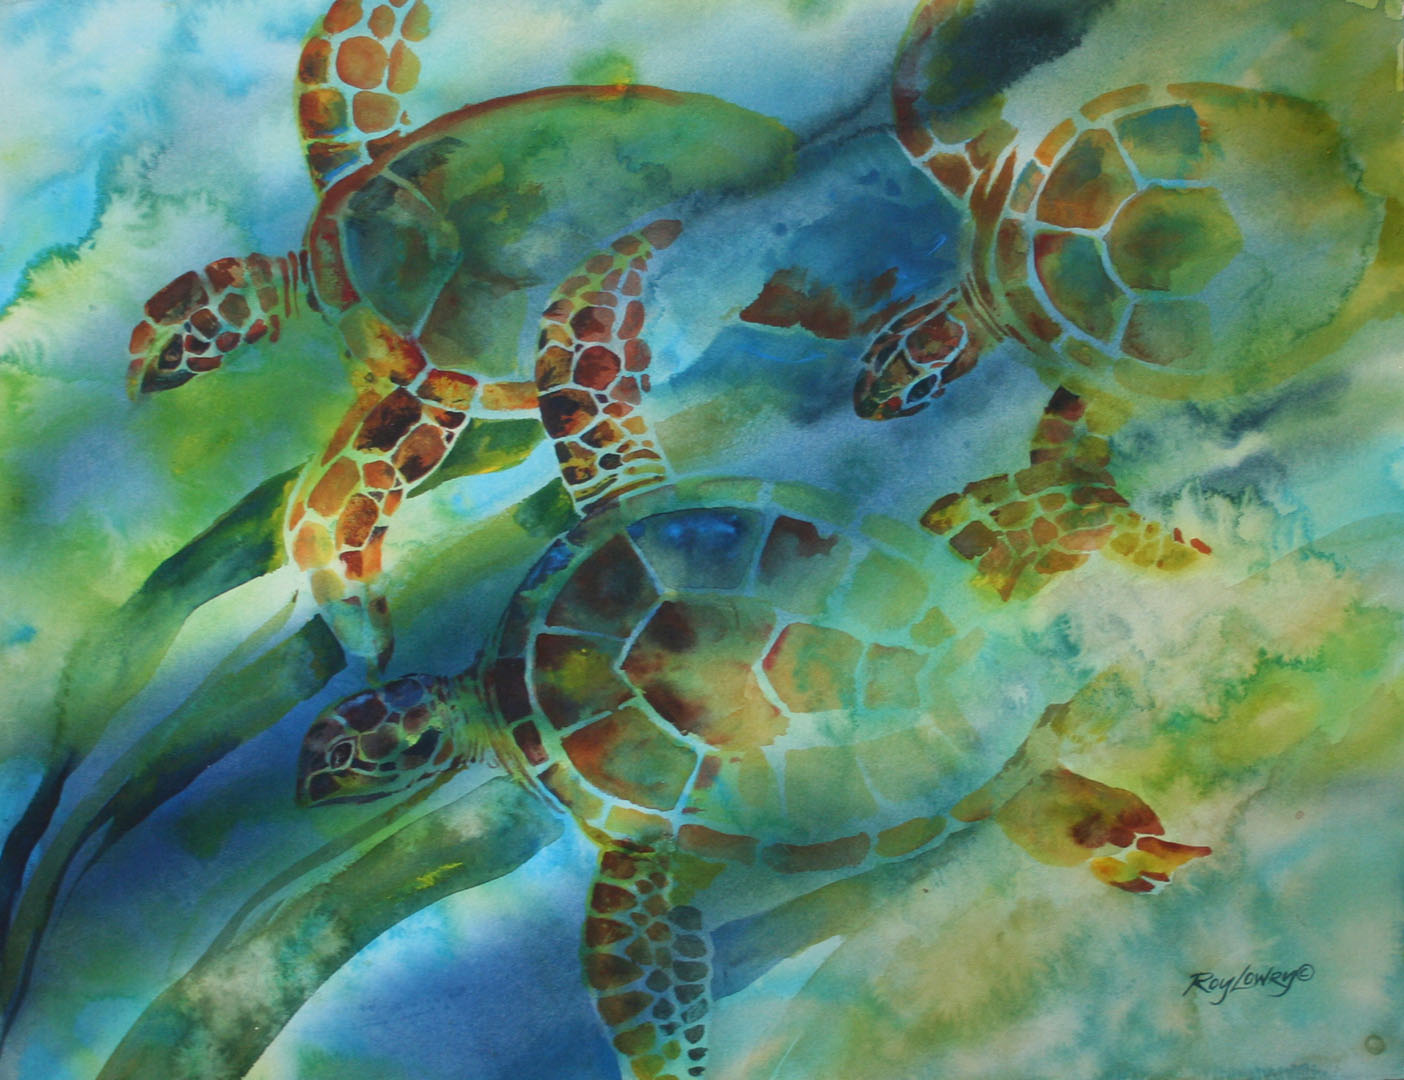 Turtle 3, Watercolor on paper, 24 x 20